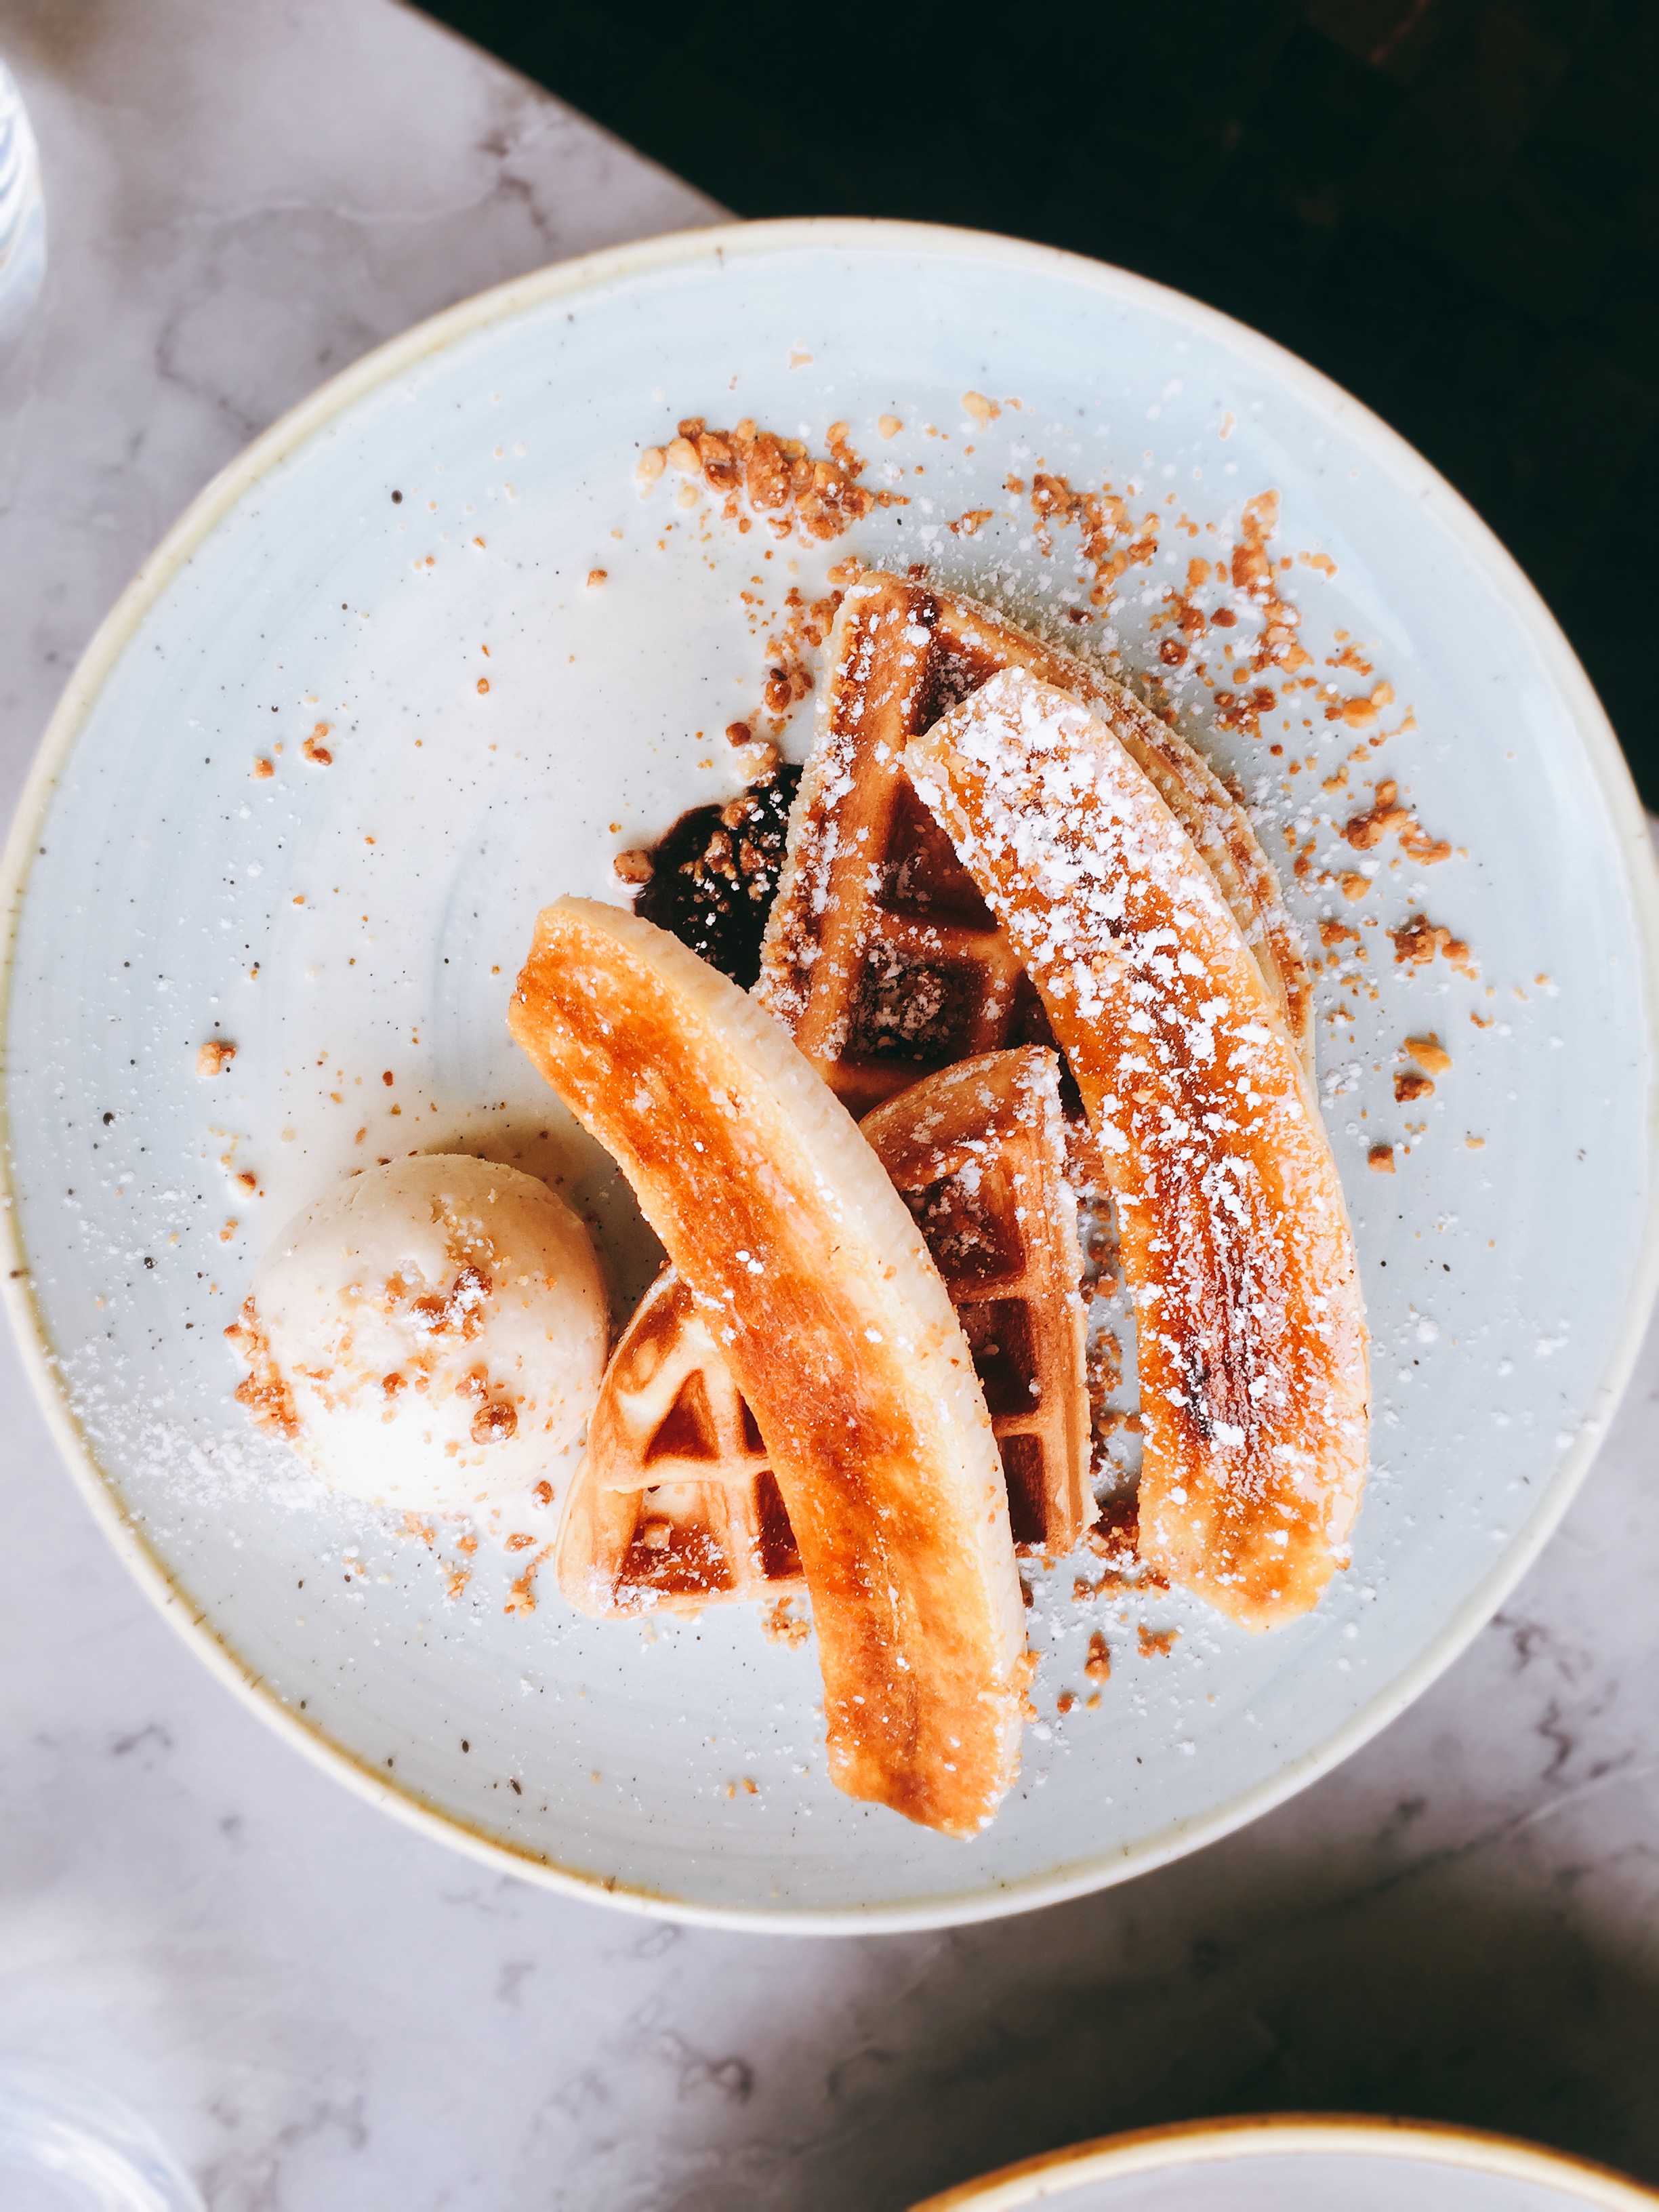 Waffles - Duck and Waffle restaurant review